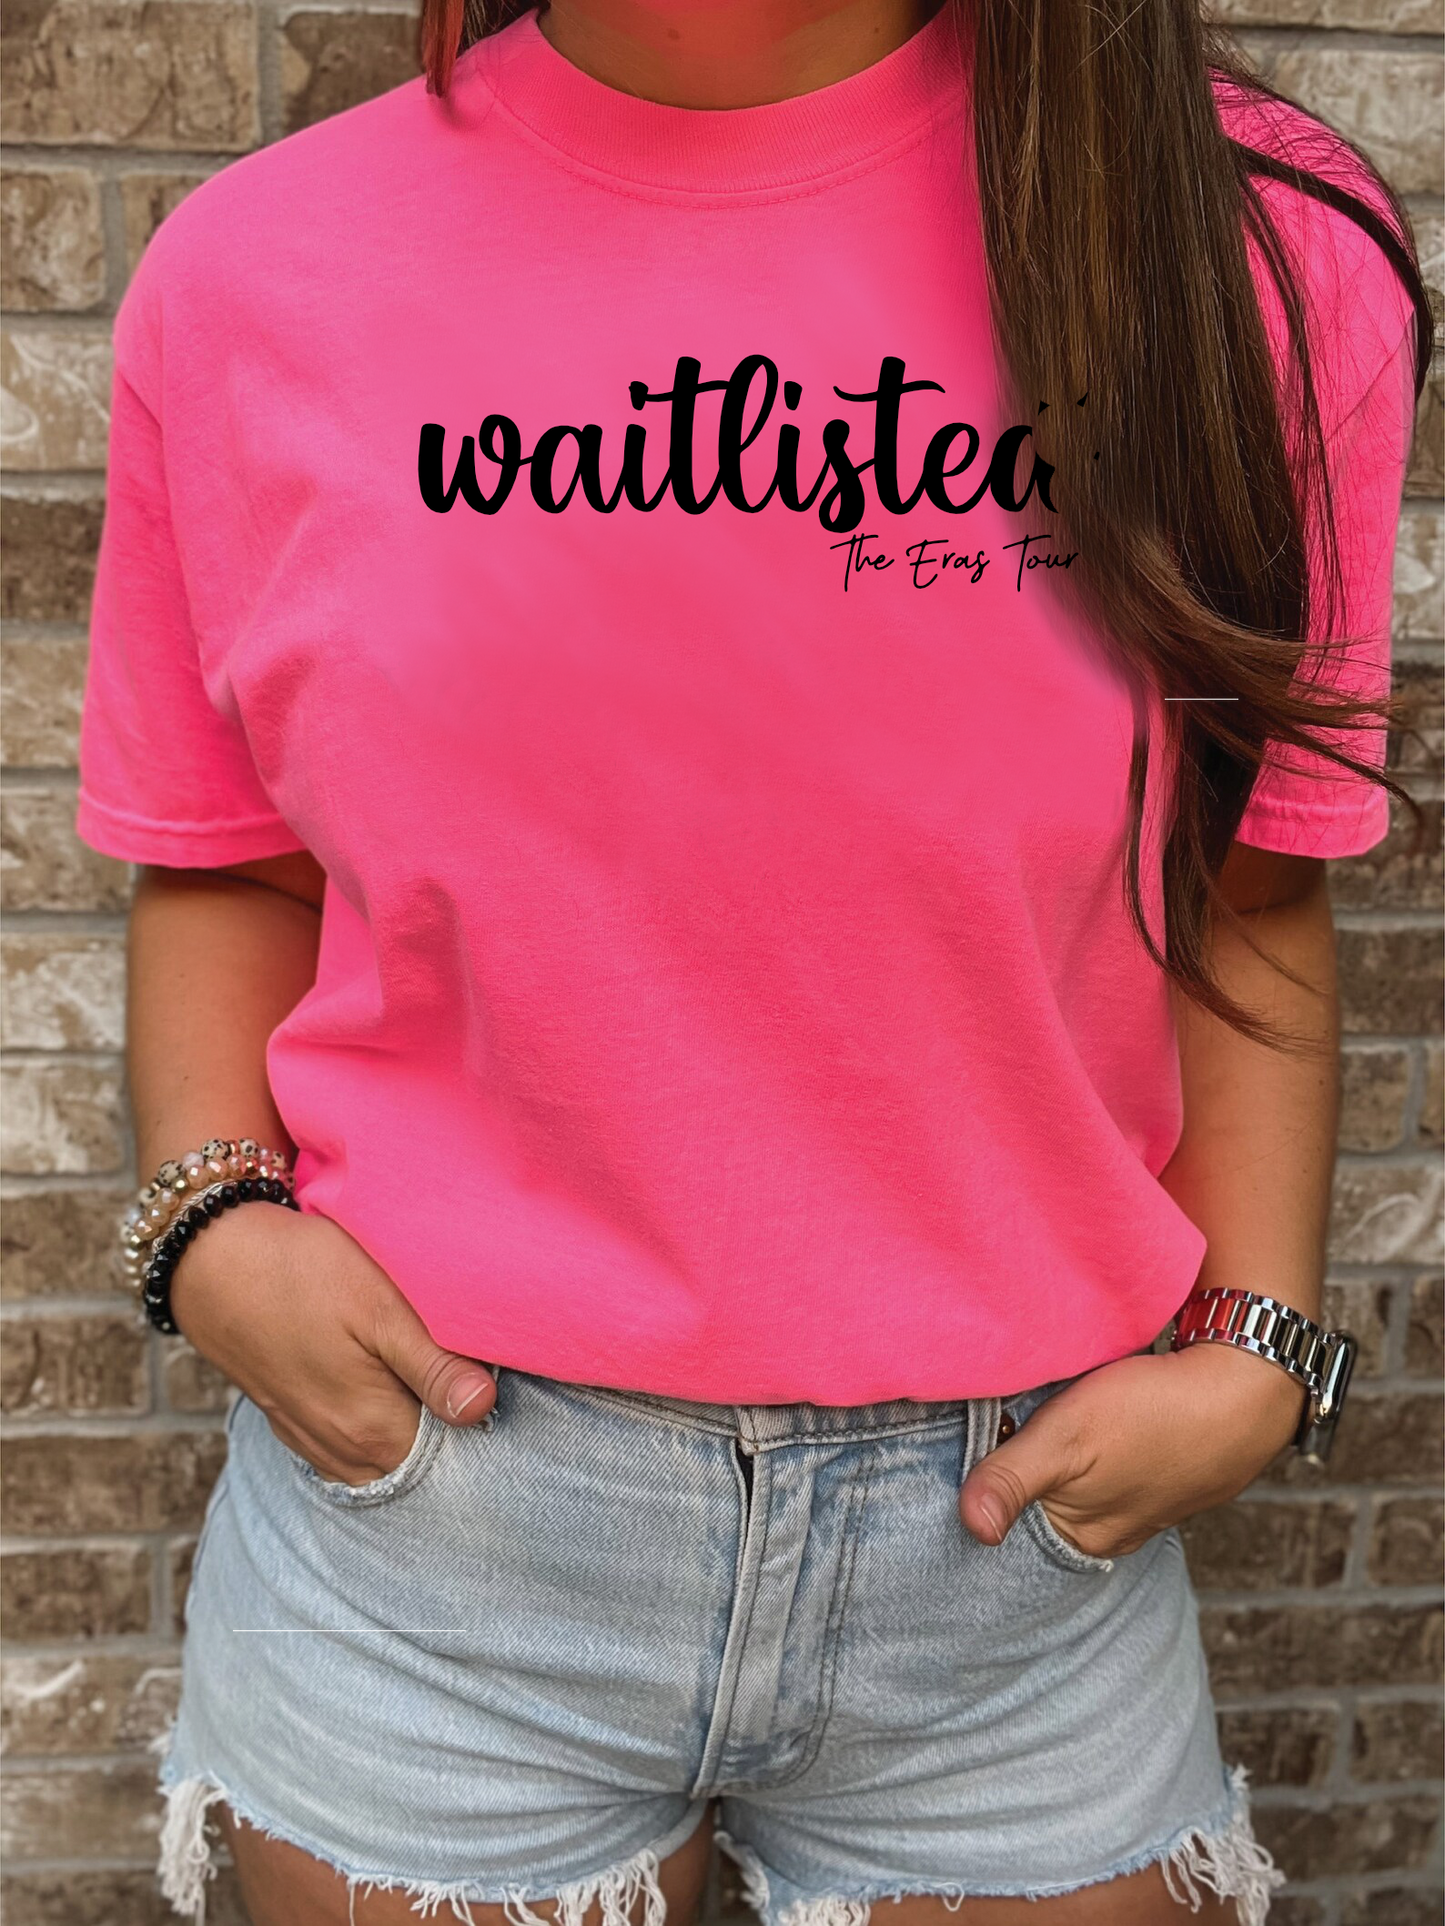 Waitlisted The Eras Tour - Taylor Swift - Adult T-Shirts